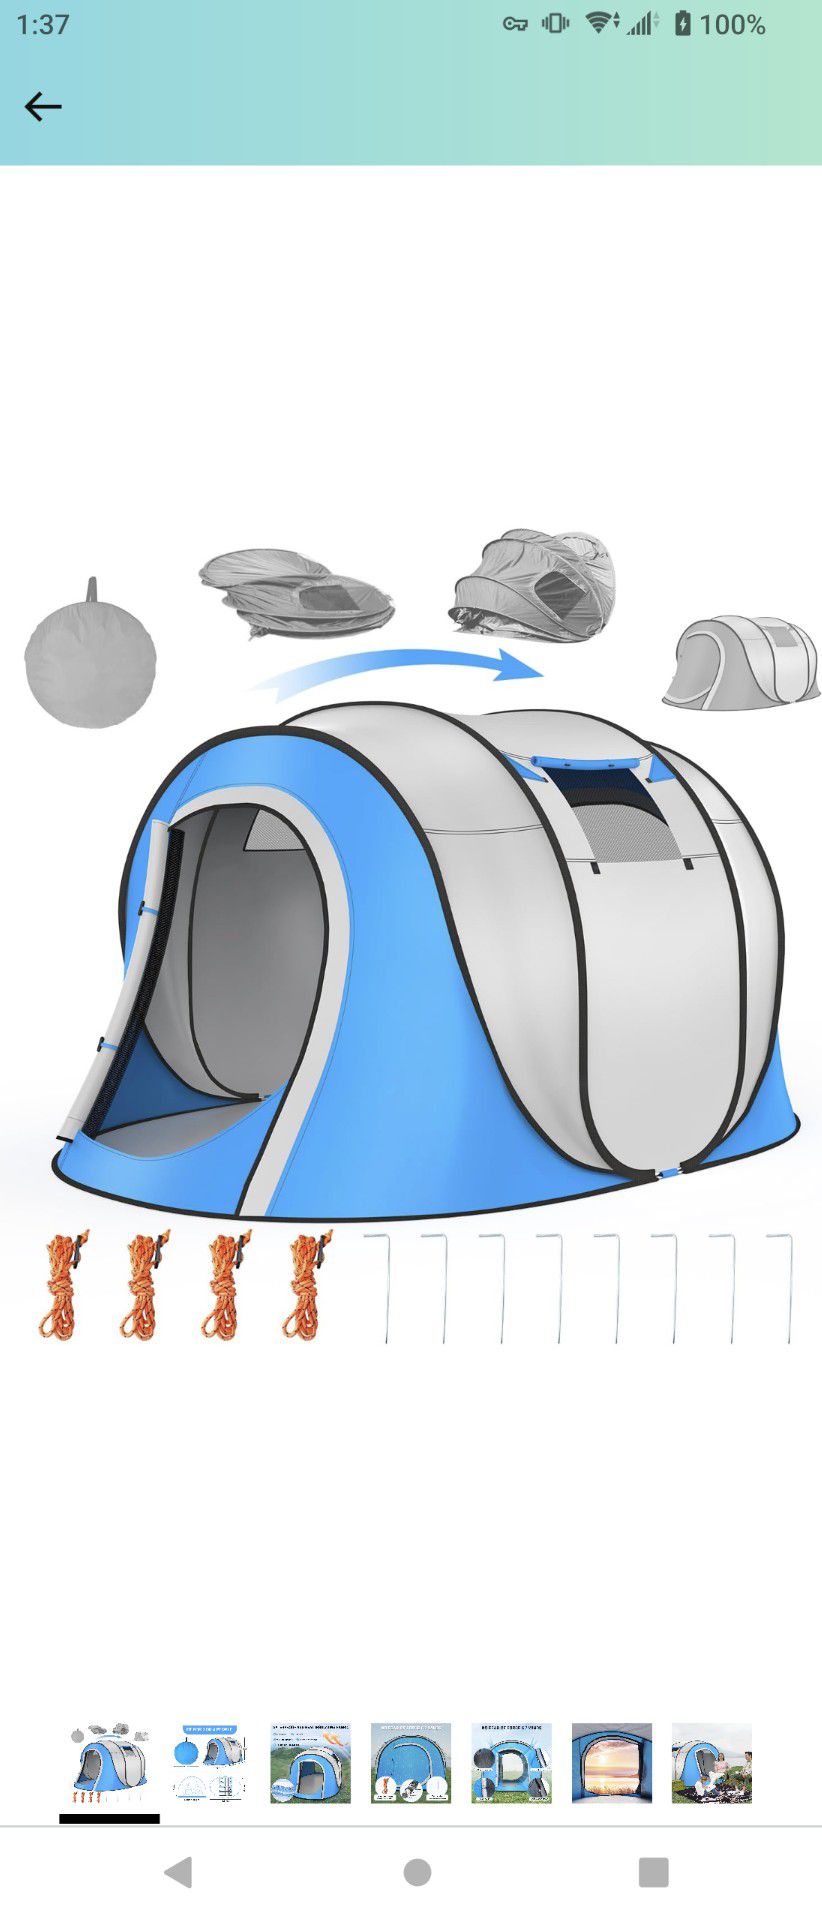 Tents for Camping Camping Tent Pop Up Tent Pop Up Tents for Camping 4 Person Tent Instant Tent Lightweight Tent
